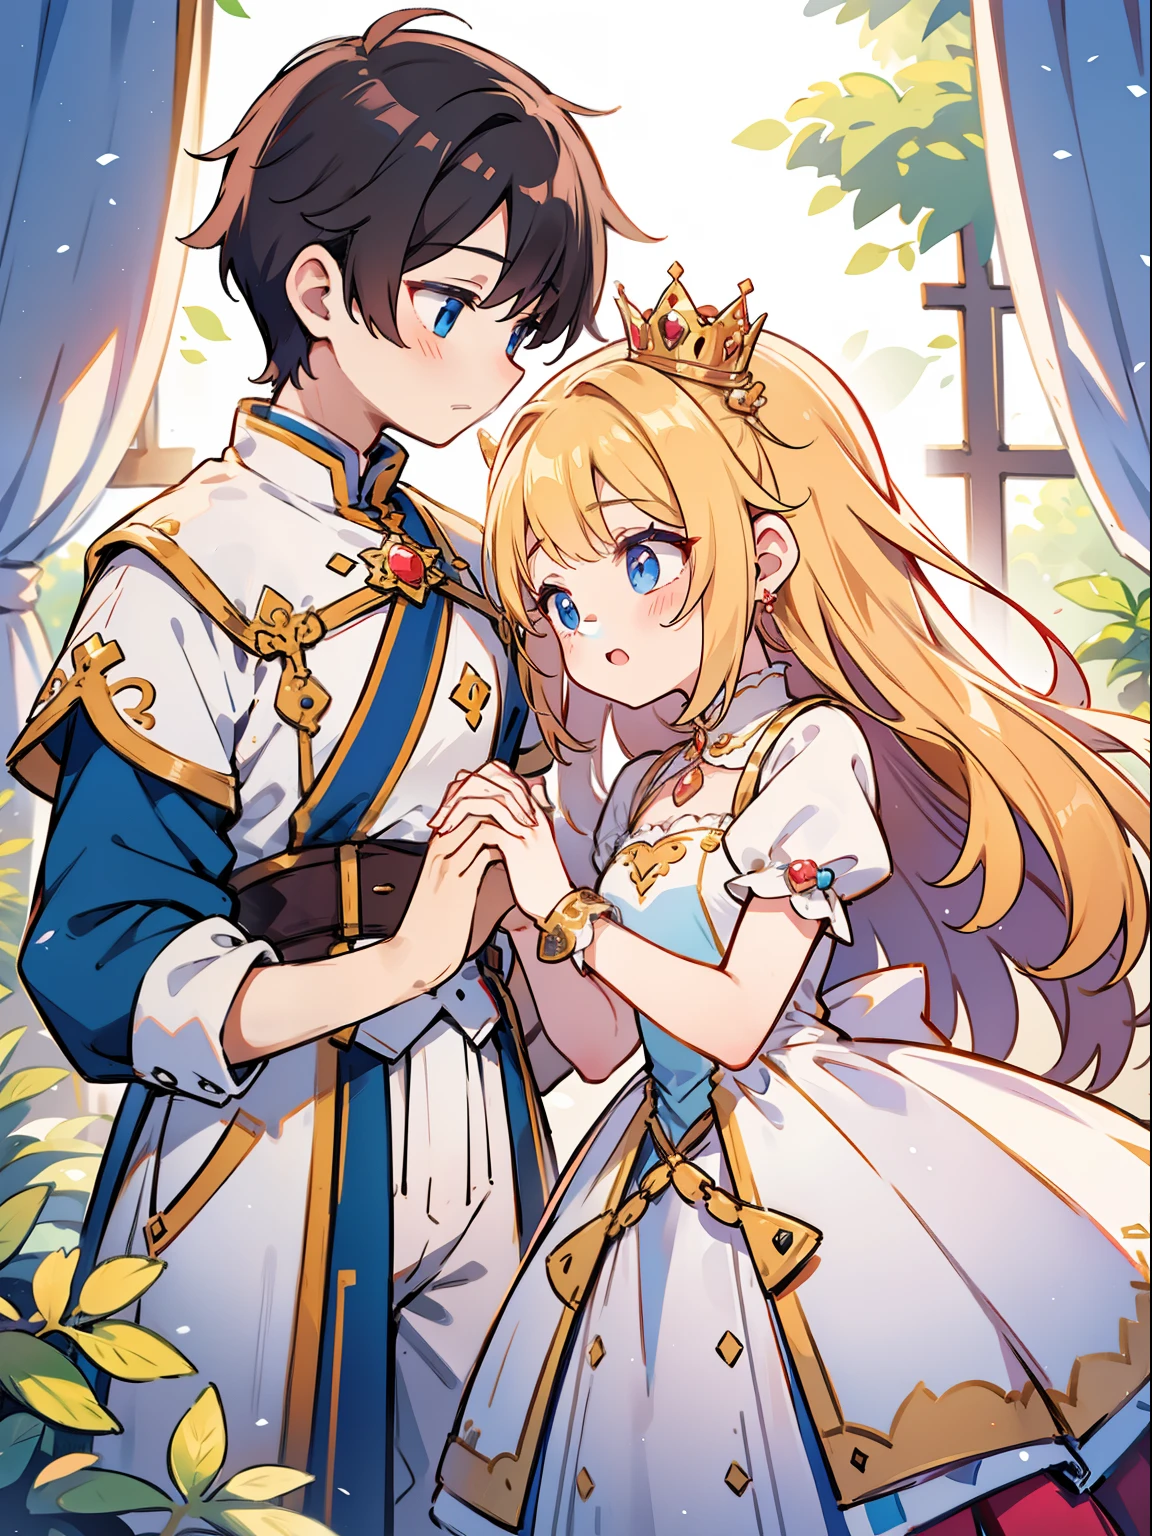 Holding hands and hands、Cute prince boy and cute princess girl、reliance、stumble